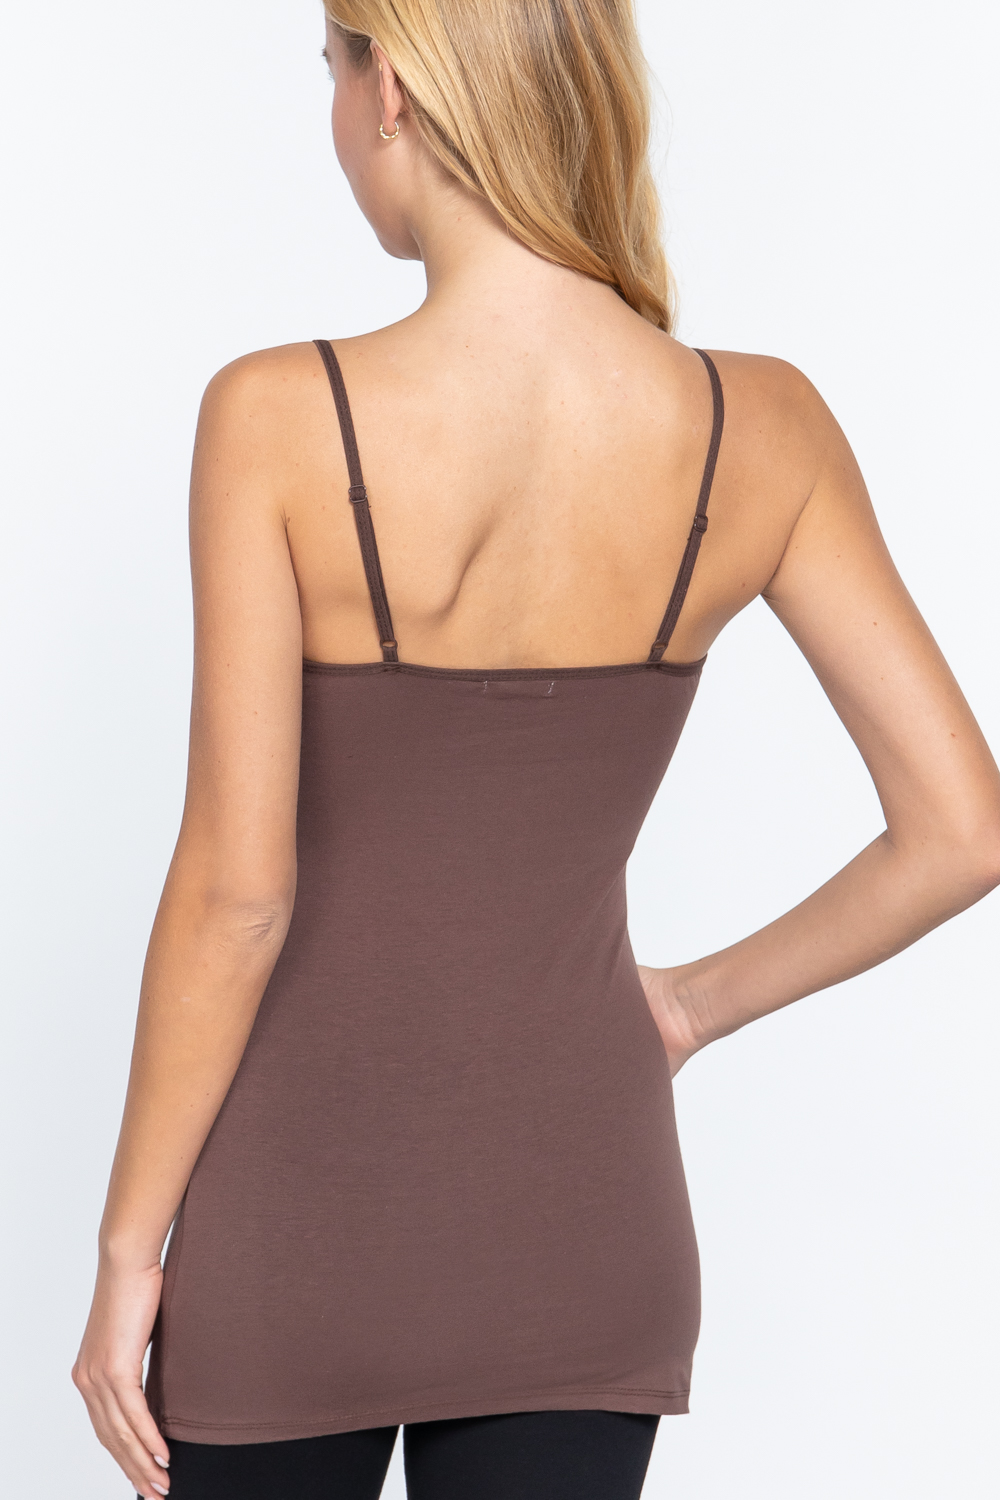 Taupe Basic Cotton Long Adjustable Spaghetti Strap Cami Tank - STB Boutique